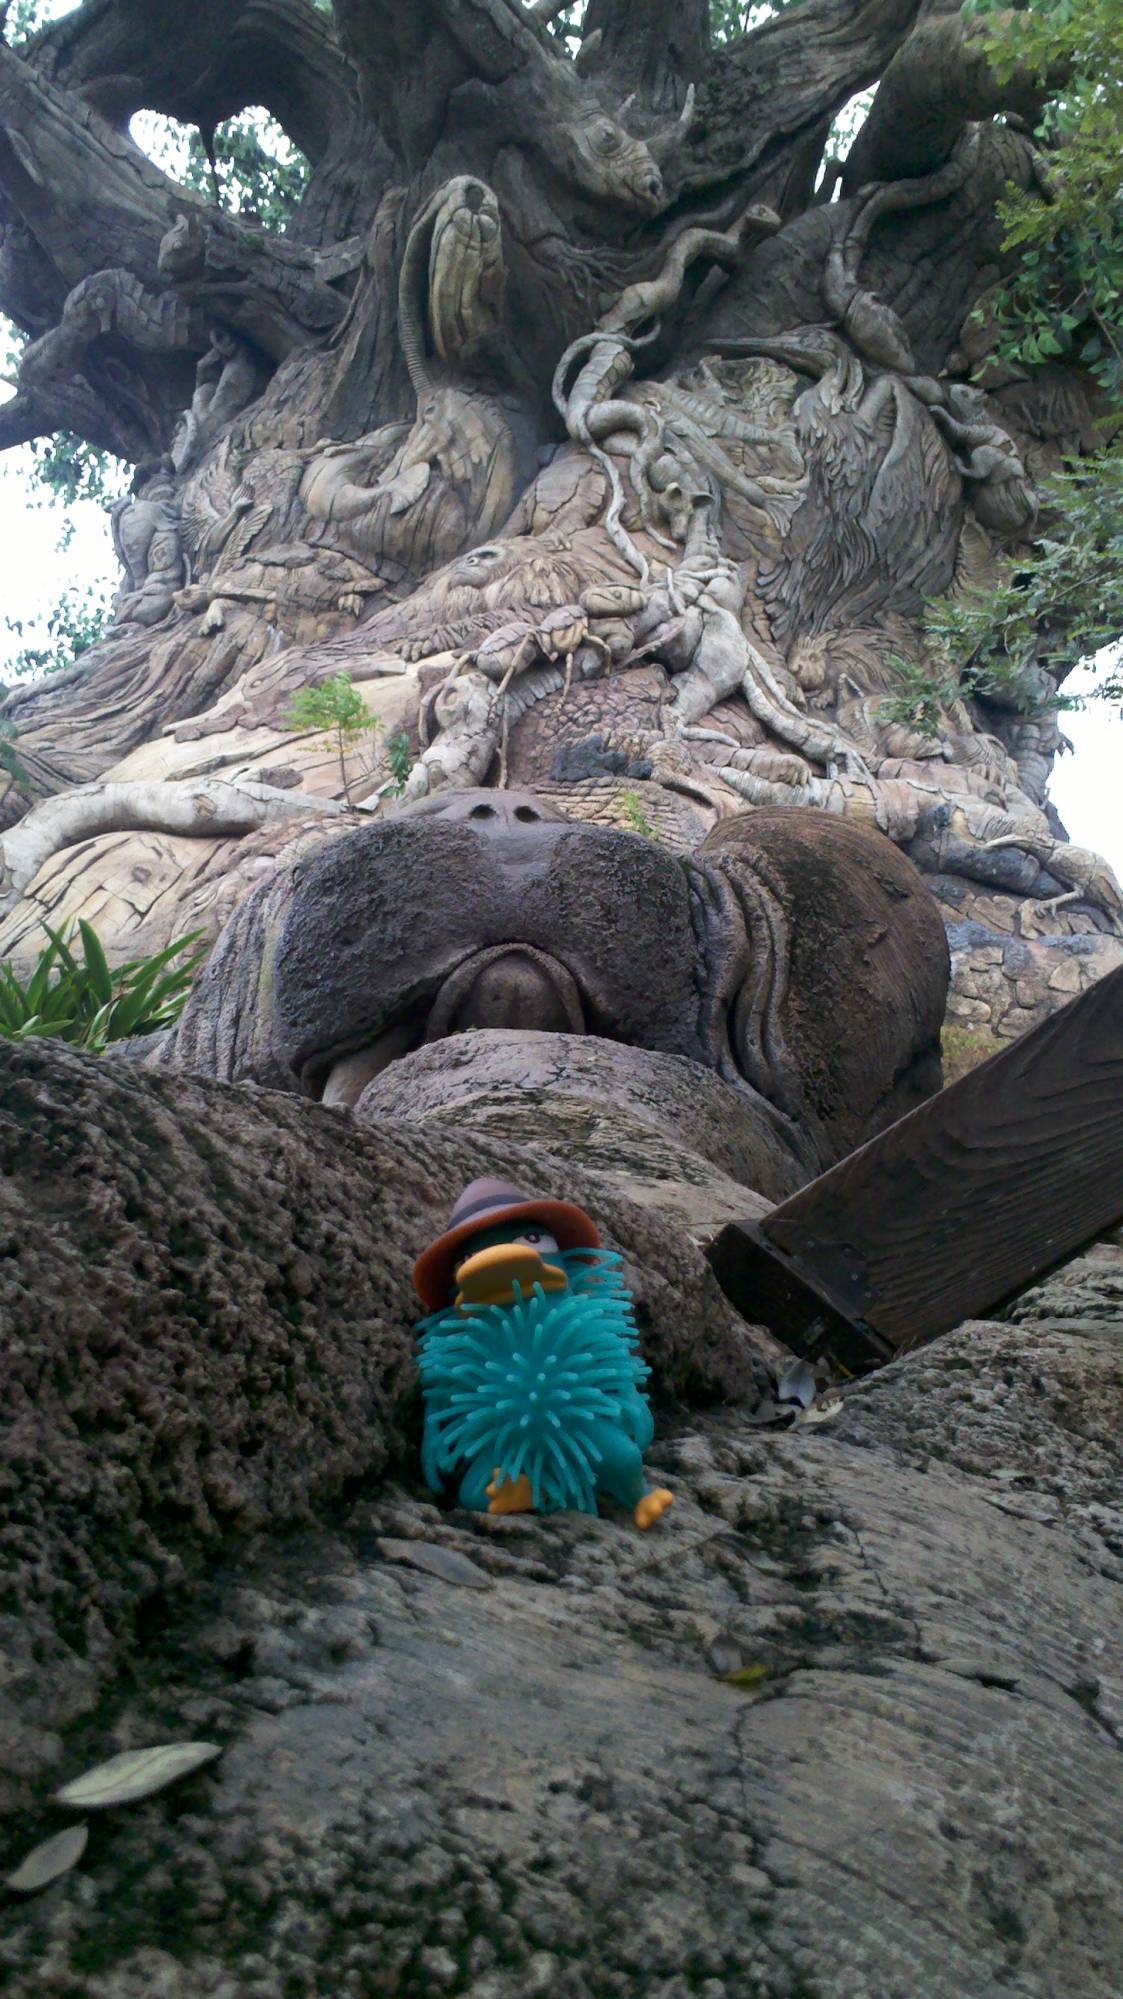 Agent P by the Tree of Life